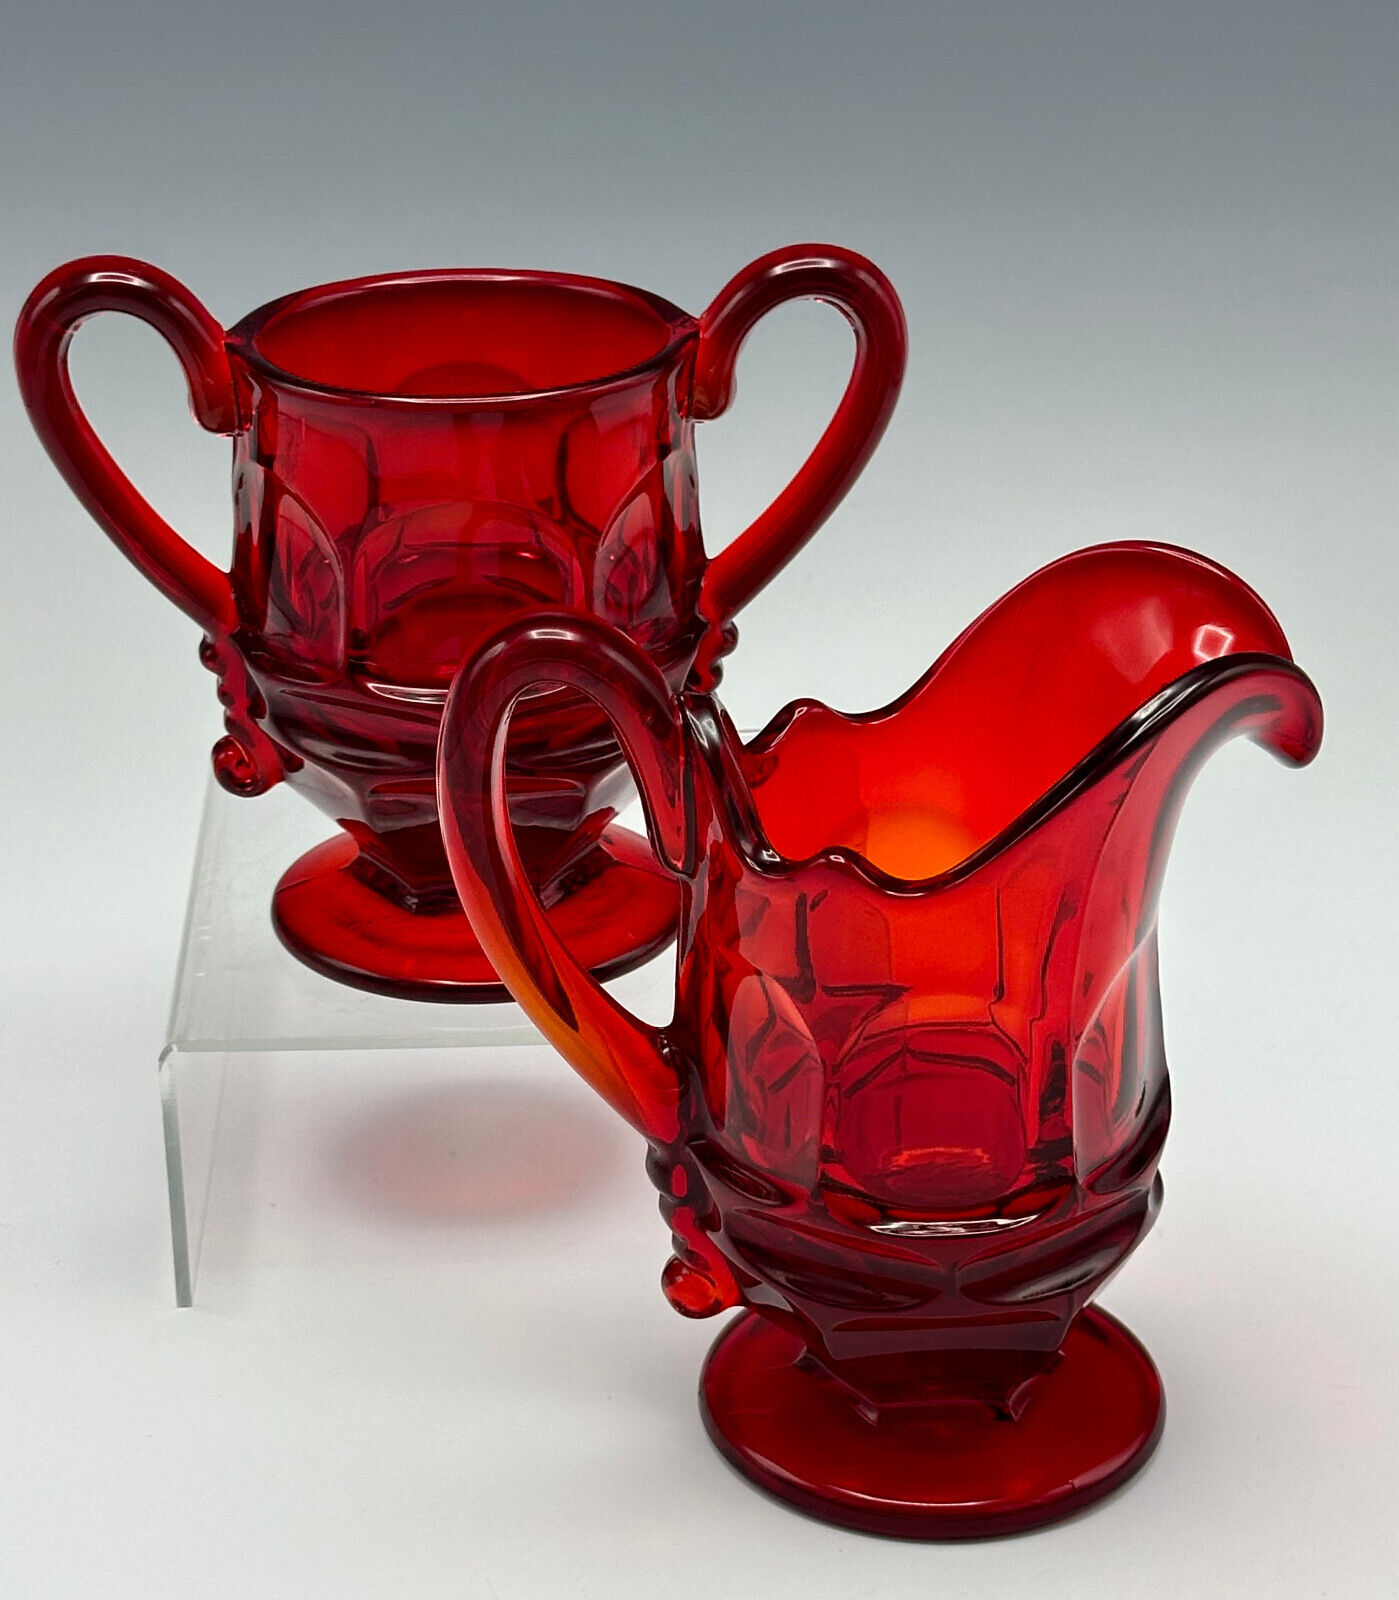 Fostoria Argus Ruby Red Glass Creamer and Sugar Bowl Henry Ford